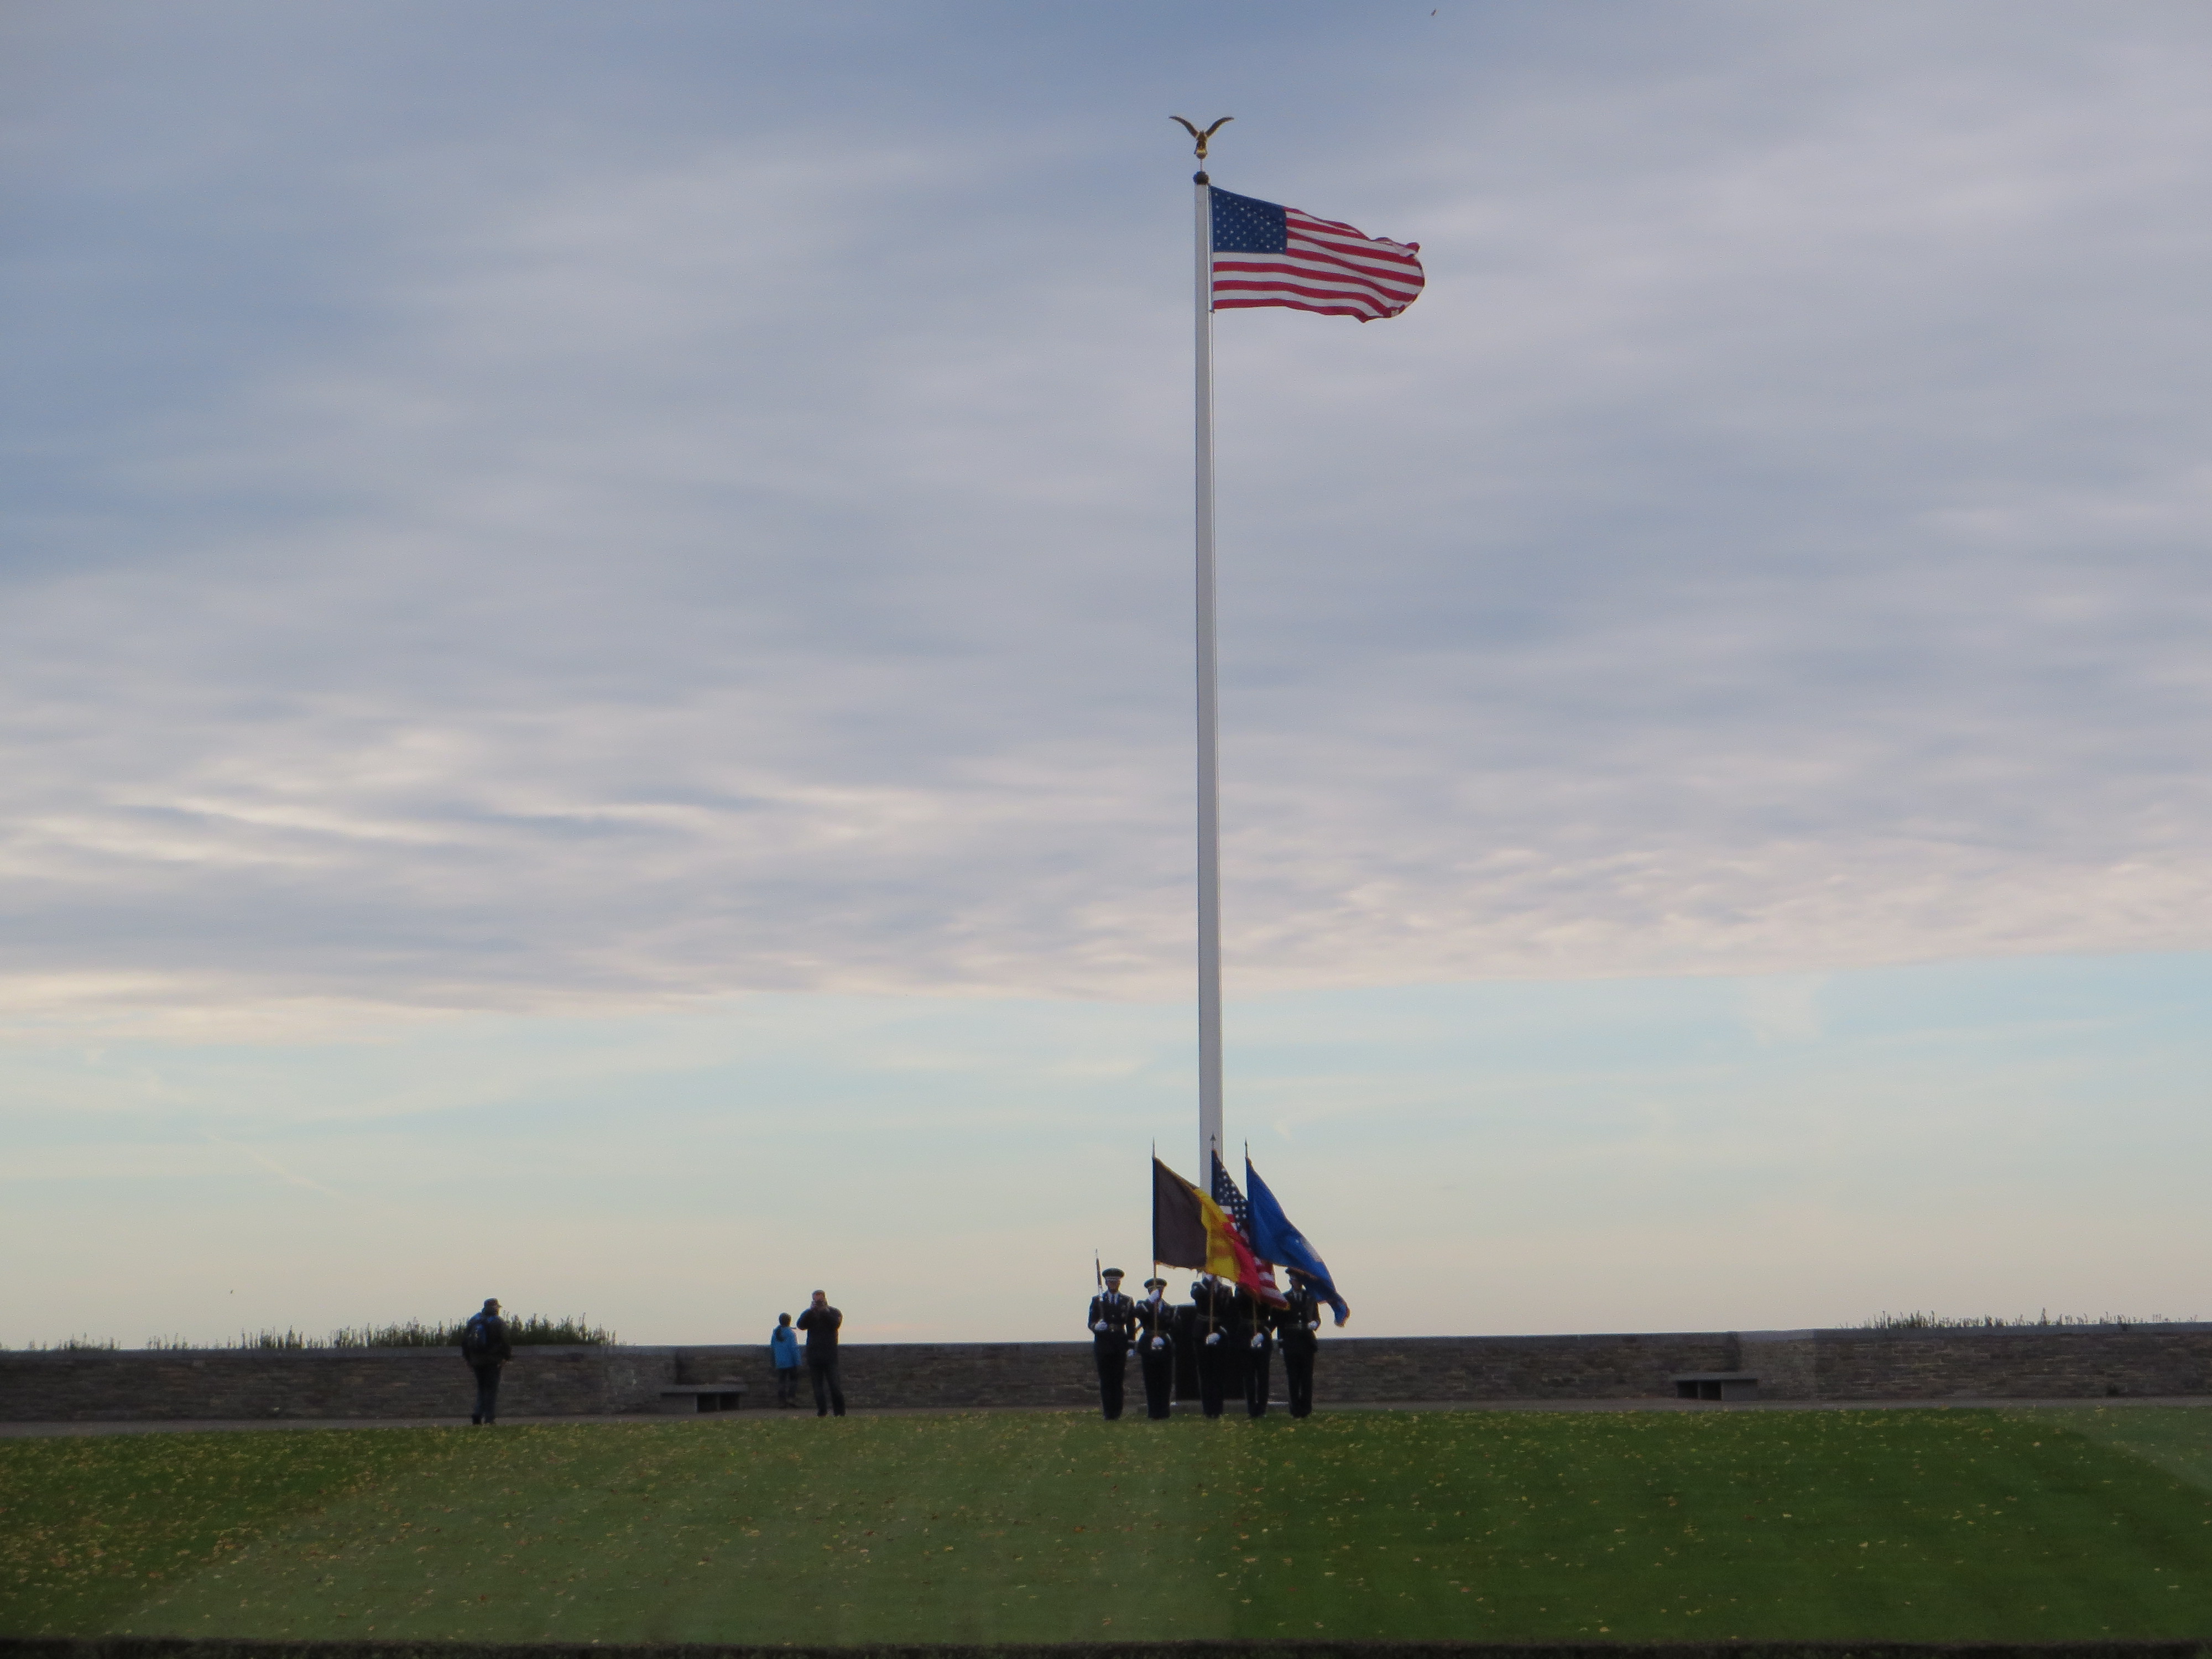 In the distance, an honor guard is seen at the flag pole. 